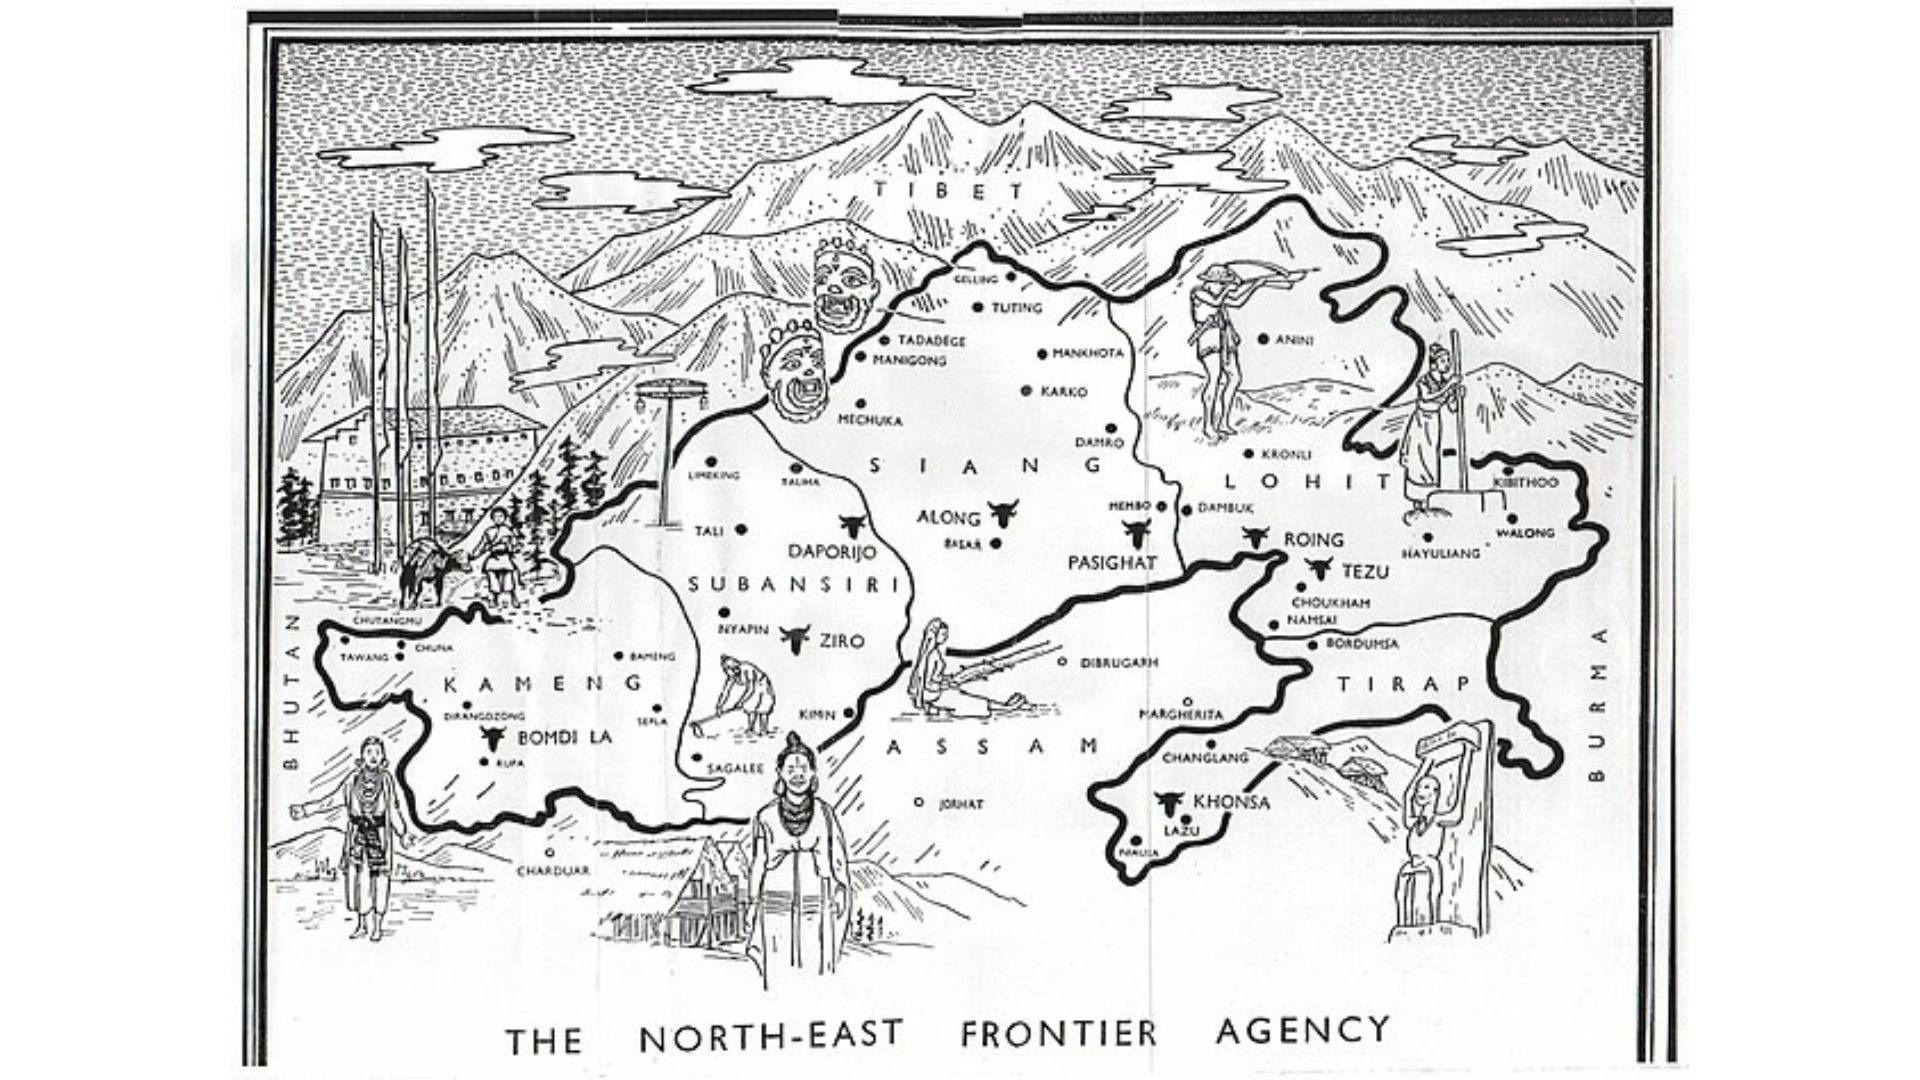 North-East Frontier Agency by Elwin from Philosophy for NEFA | Wikimedia Commons